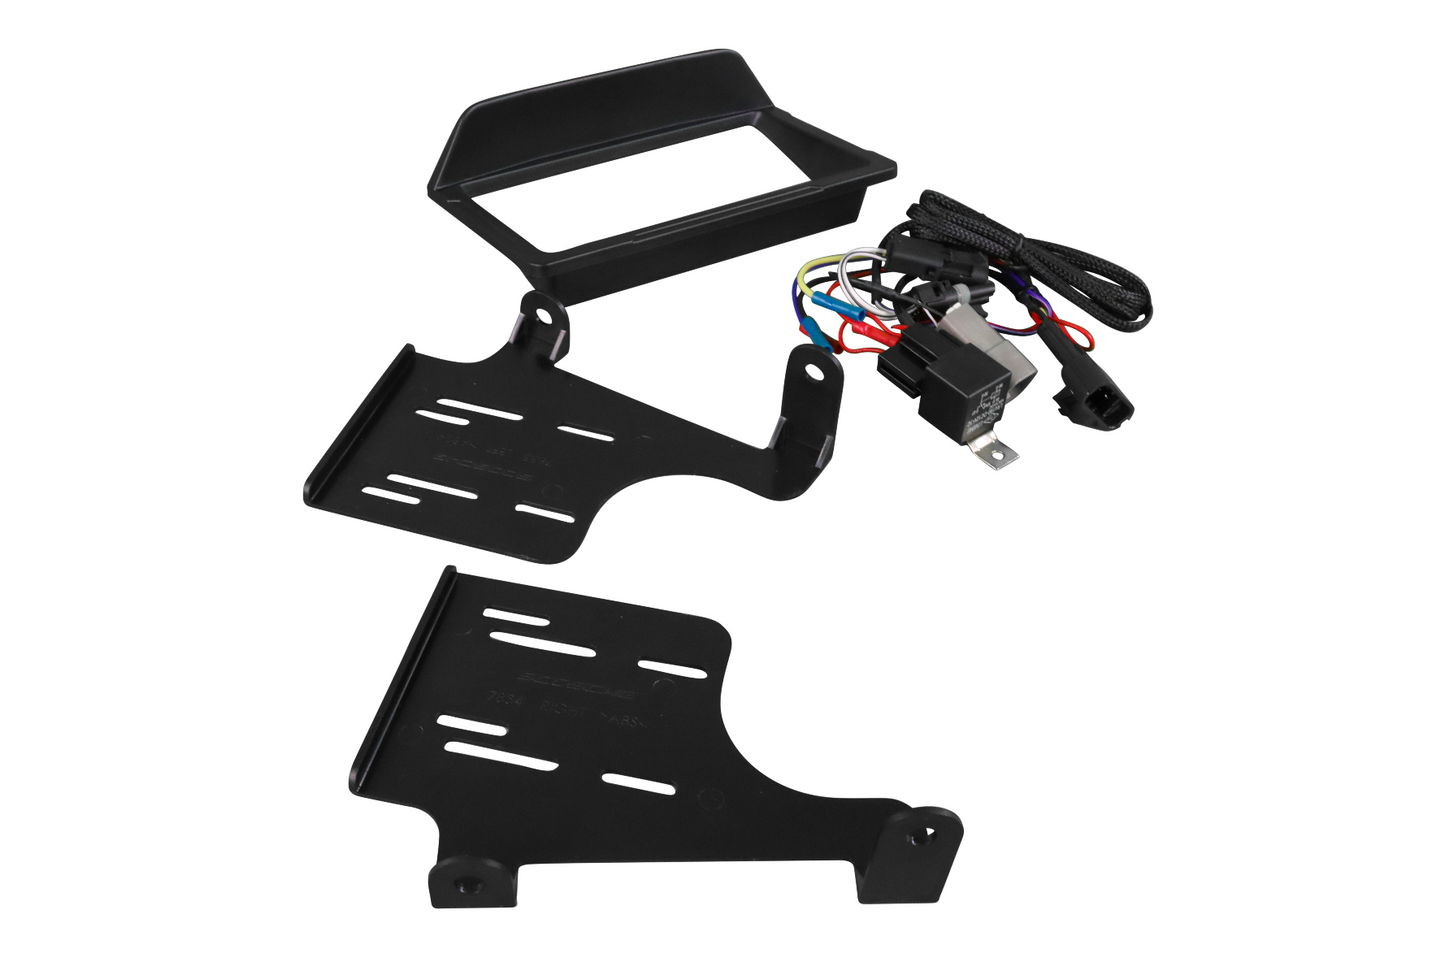 SCOSCHE DOUBLE DIN- WIRE HARNESS KIT FOR THE POLARIS SLINGSHOT